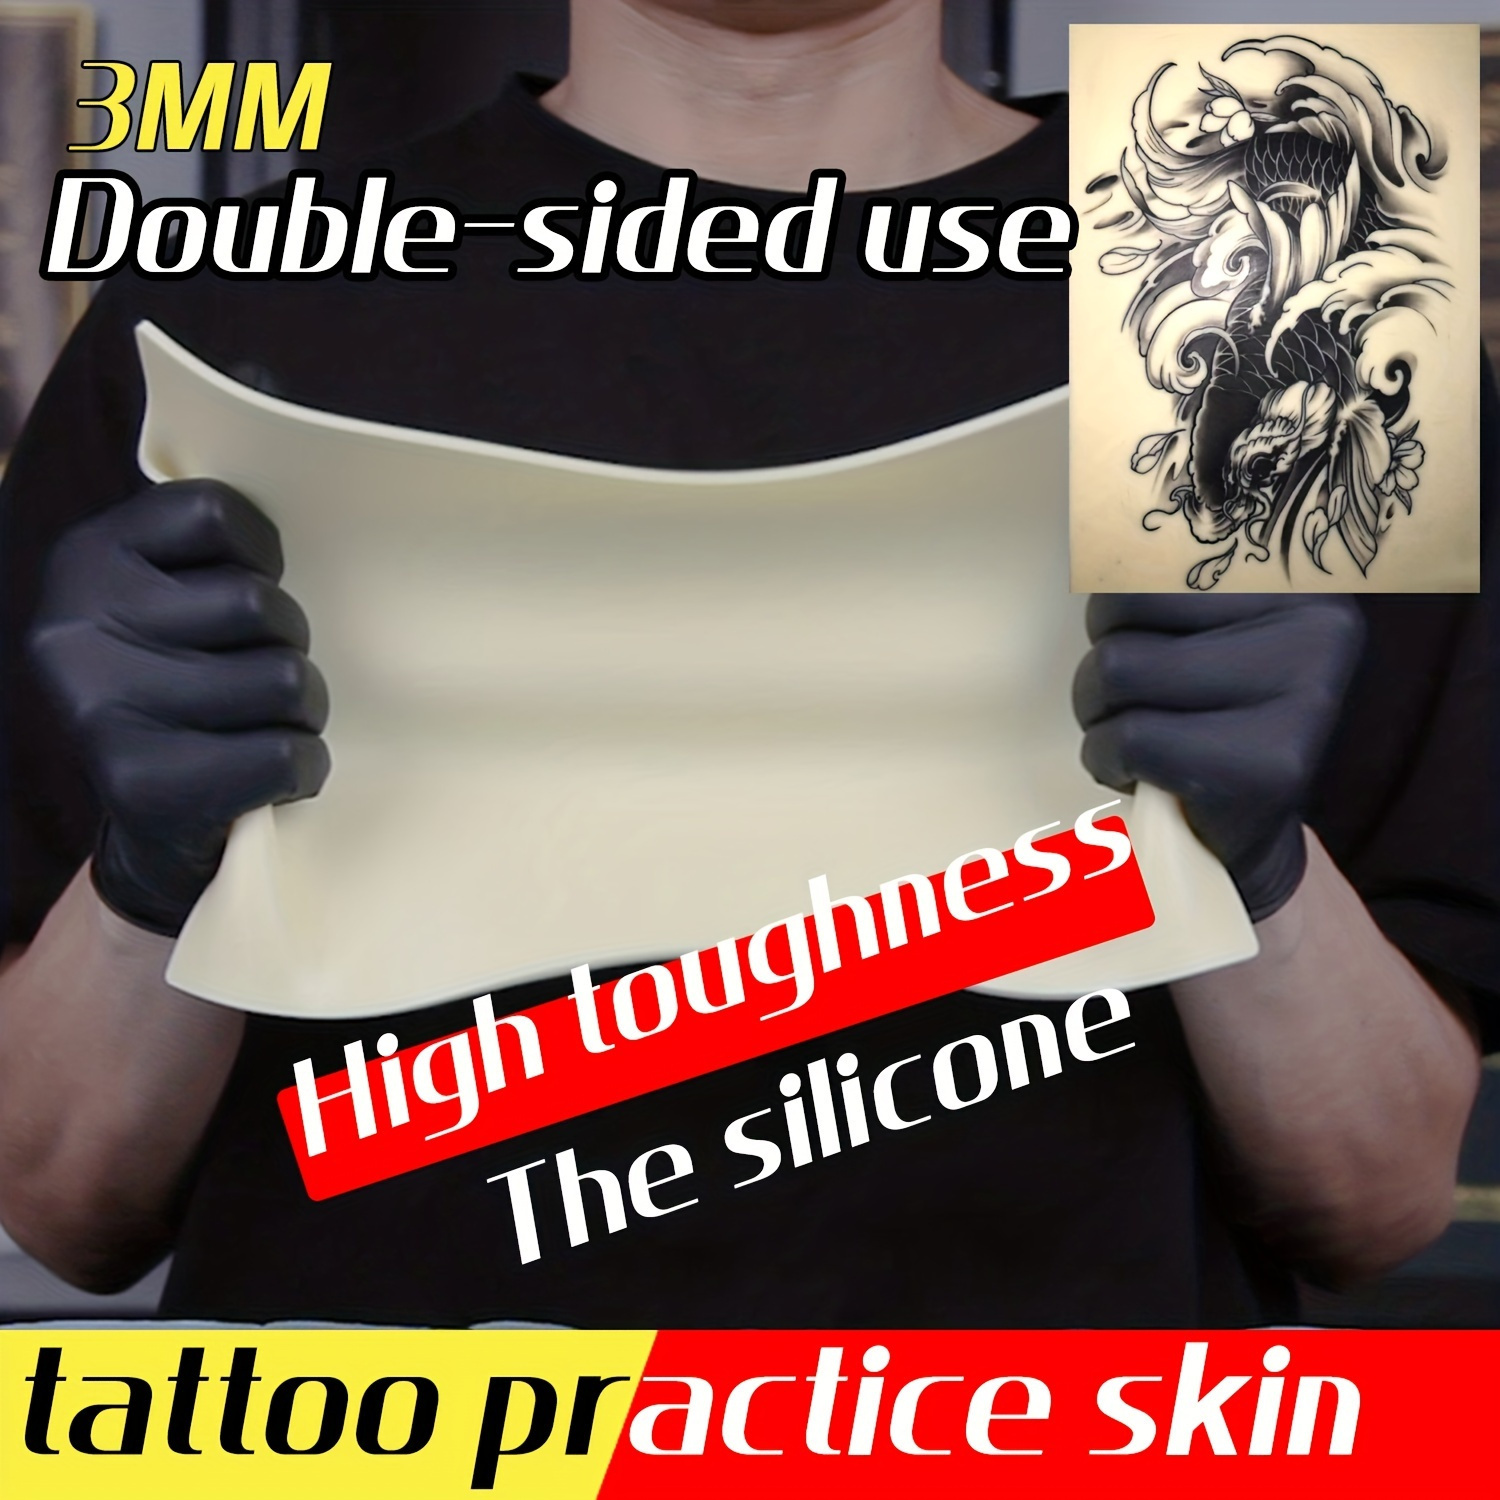 12PCS Blank Tattoo Skin Practice - 6 Inch X 8 Inch Double Sides